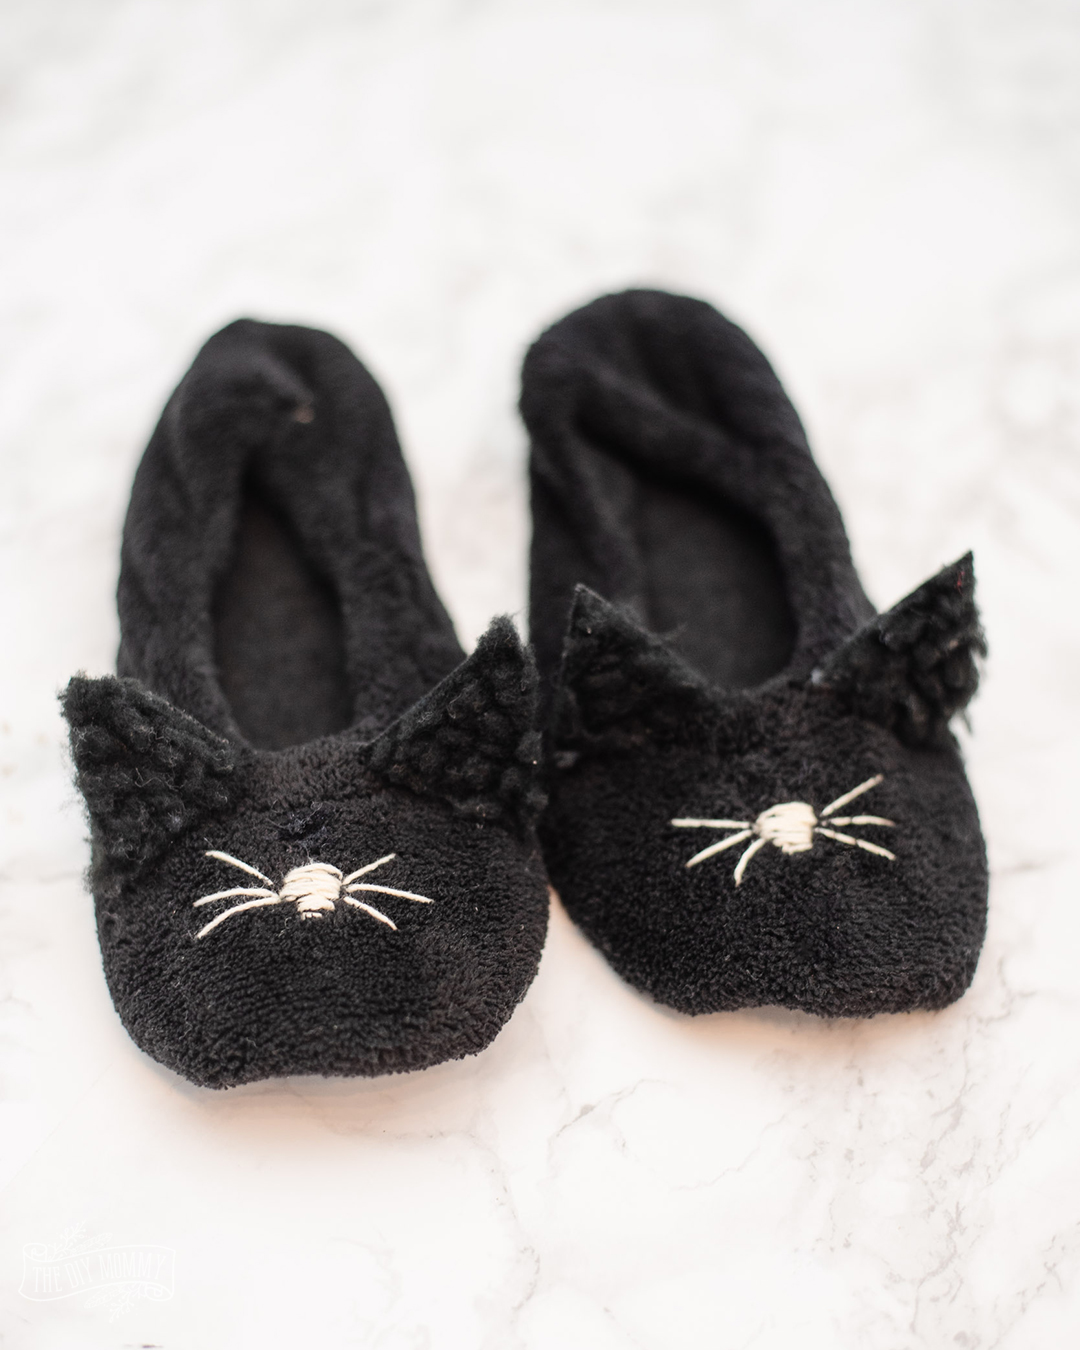 Learn how to make these cute DIY cat slippers from $3 Walmart slippers. So easy to make and an adorable gift!